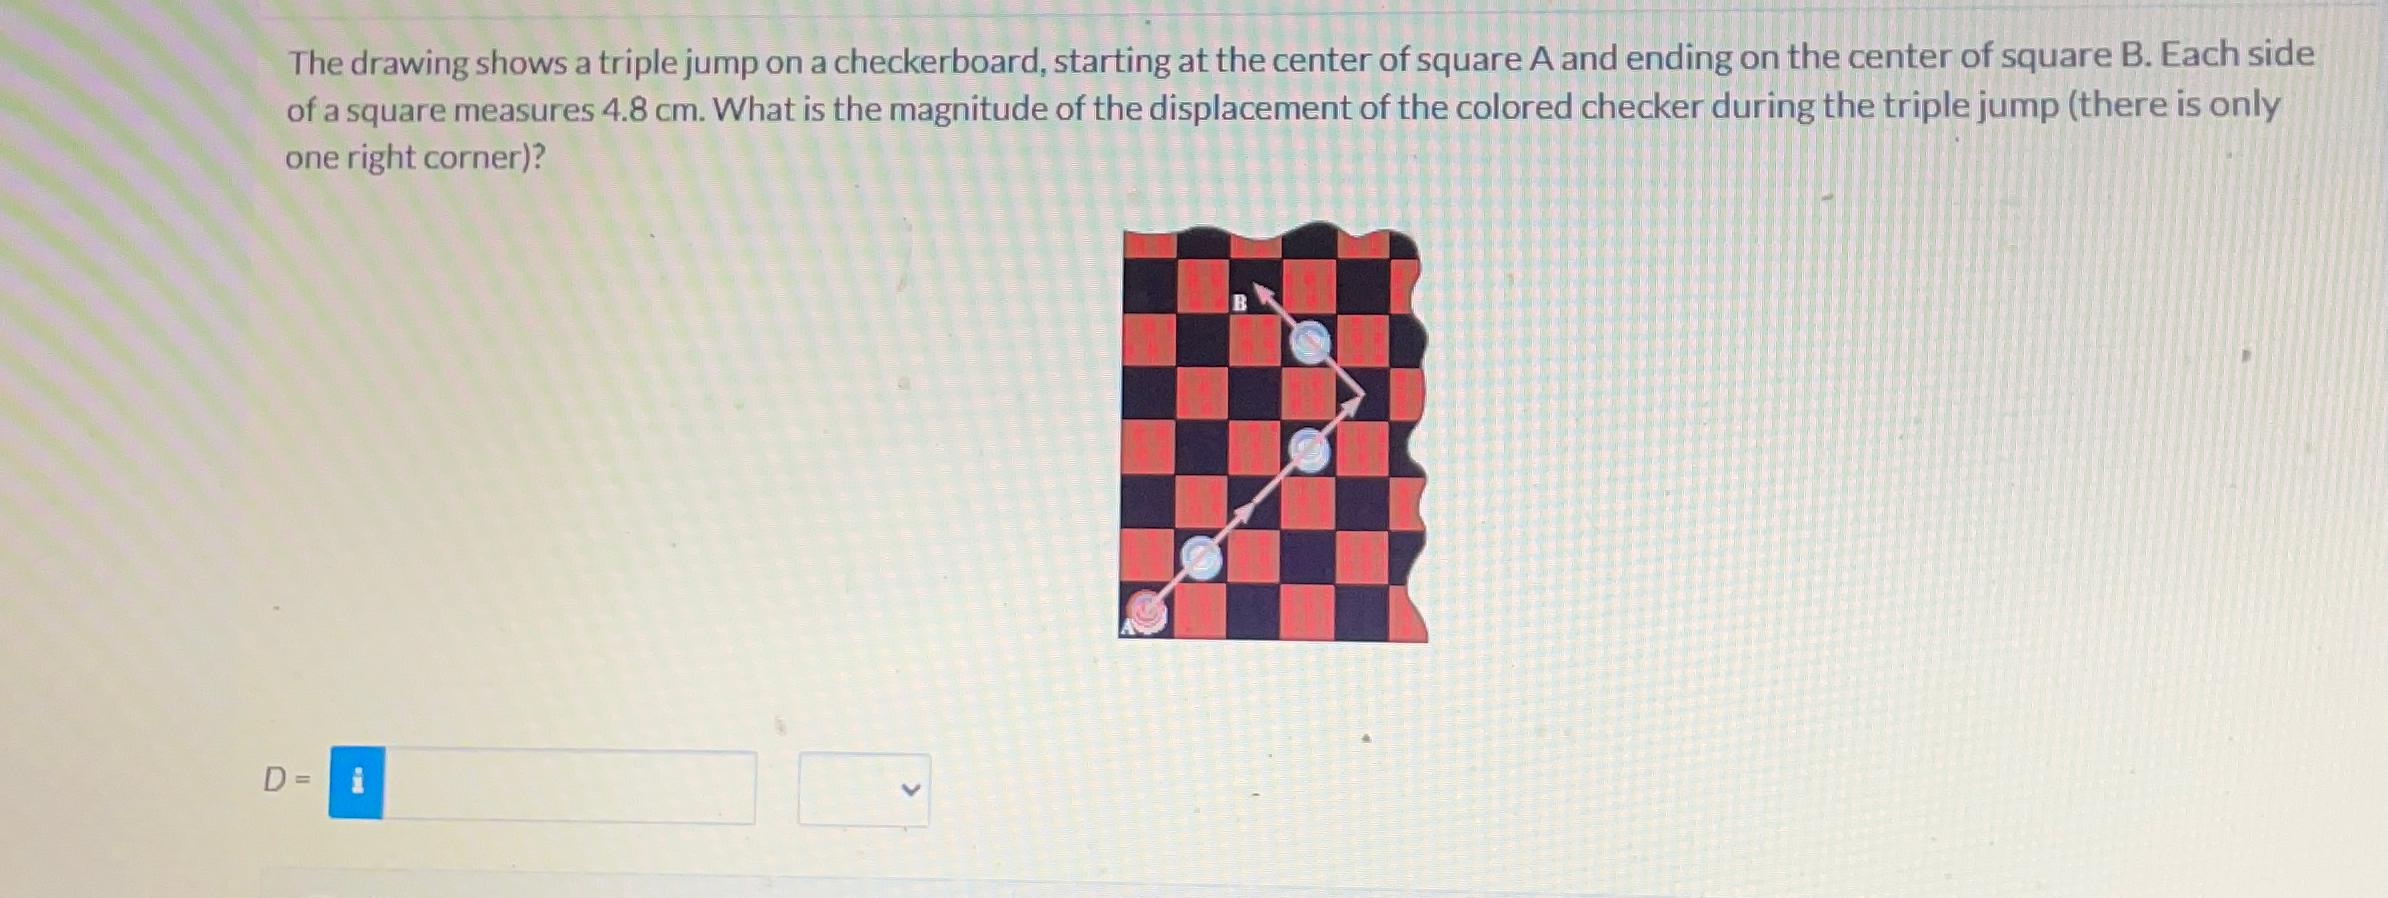 The drawing shows a triple jump on a checkerboard, starting at the center of square A and ending on the